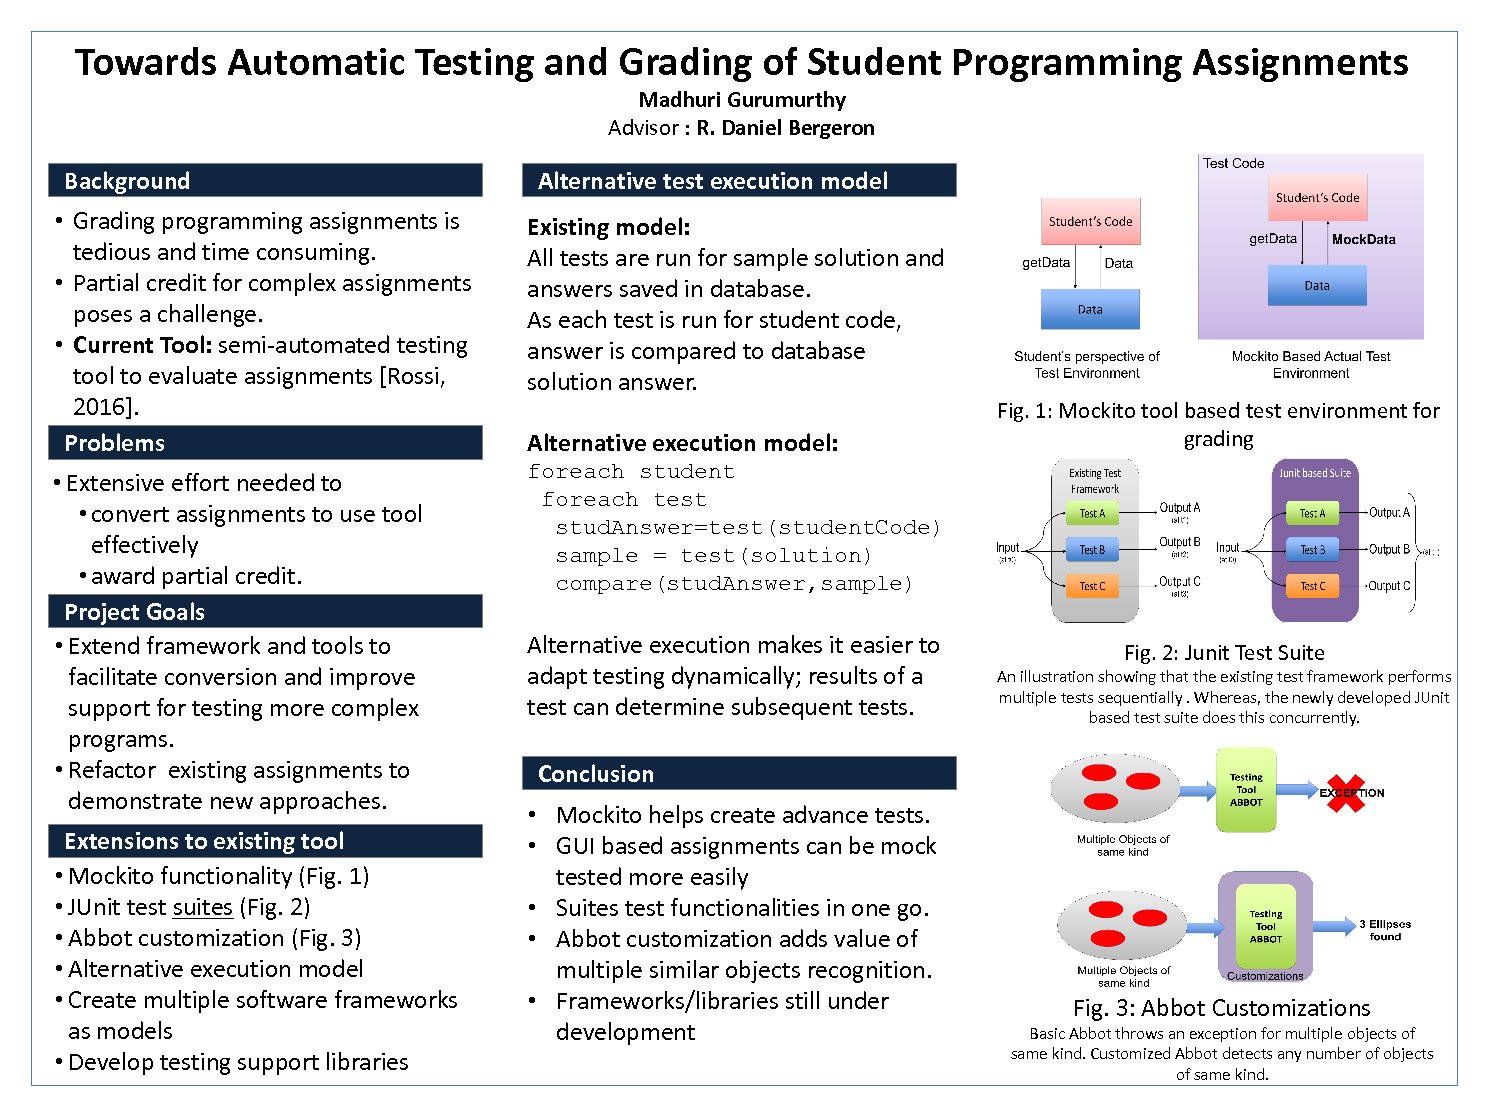 Towards Automatic Testing And Grading Of Student Programming Assignments by MadhuriGurumurthy